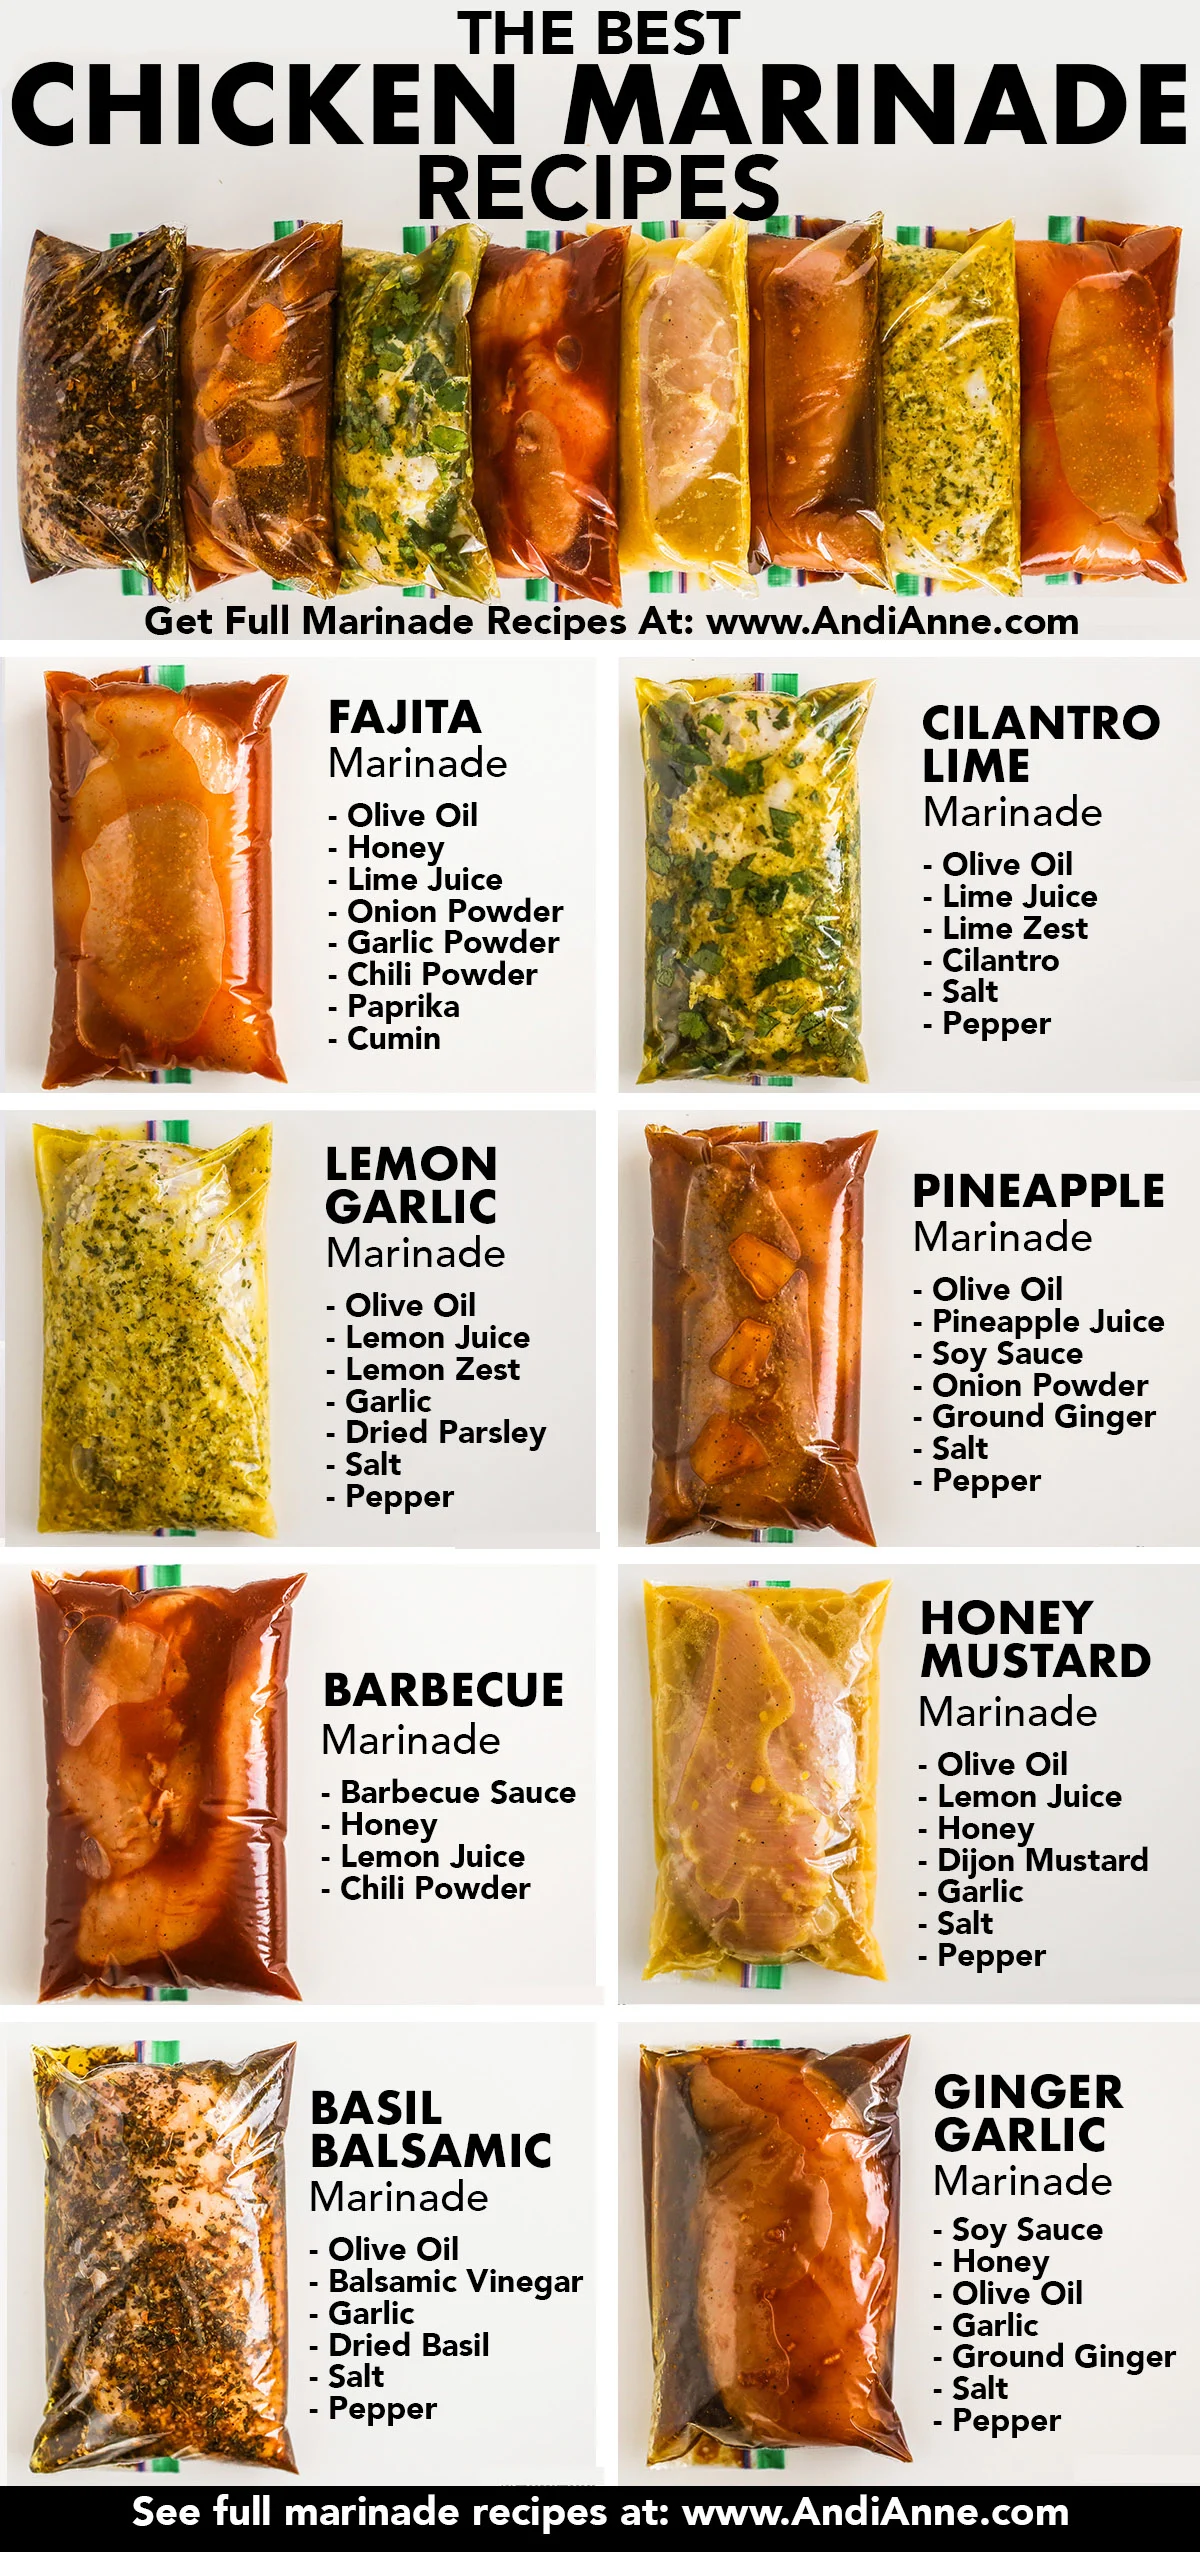 A full list of chicken marinades in ziploc bags, each with title and ingredients list written beside each one. The title "the best chicken marinade recipes" at the top.